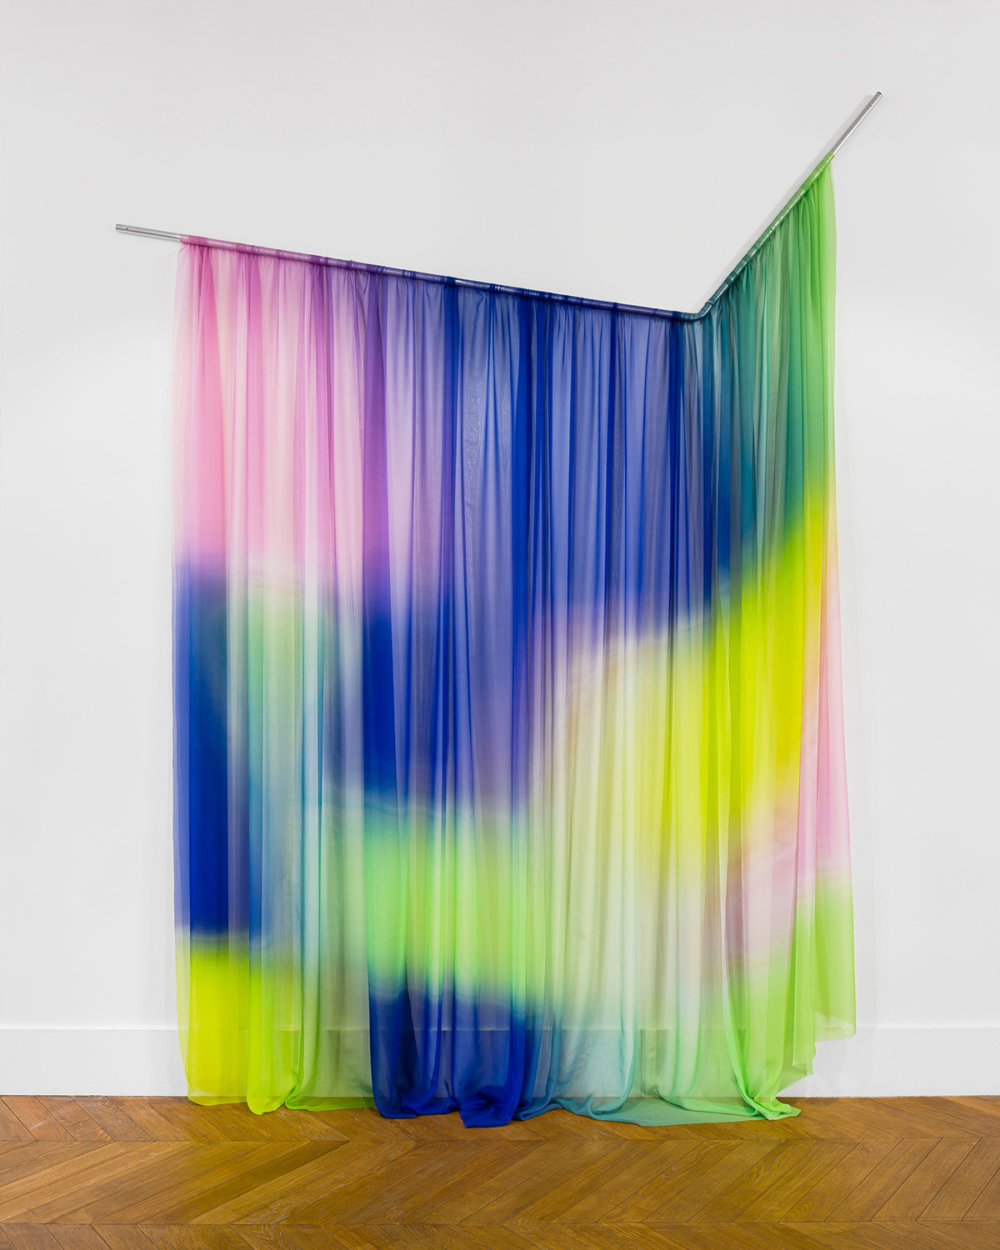 Equilibrum A Superb And Original Installation Of Colored Silk By Justin Morin 6